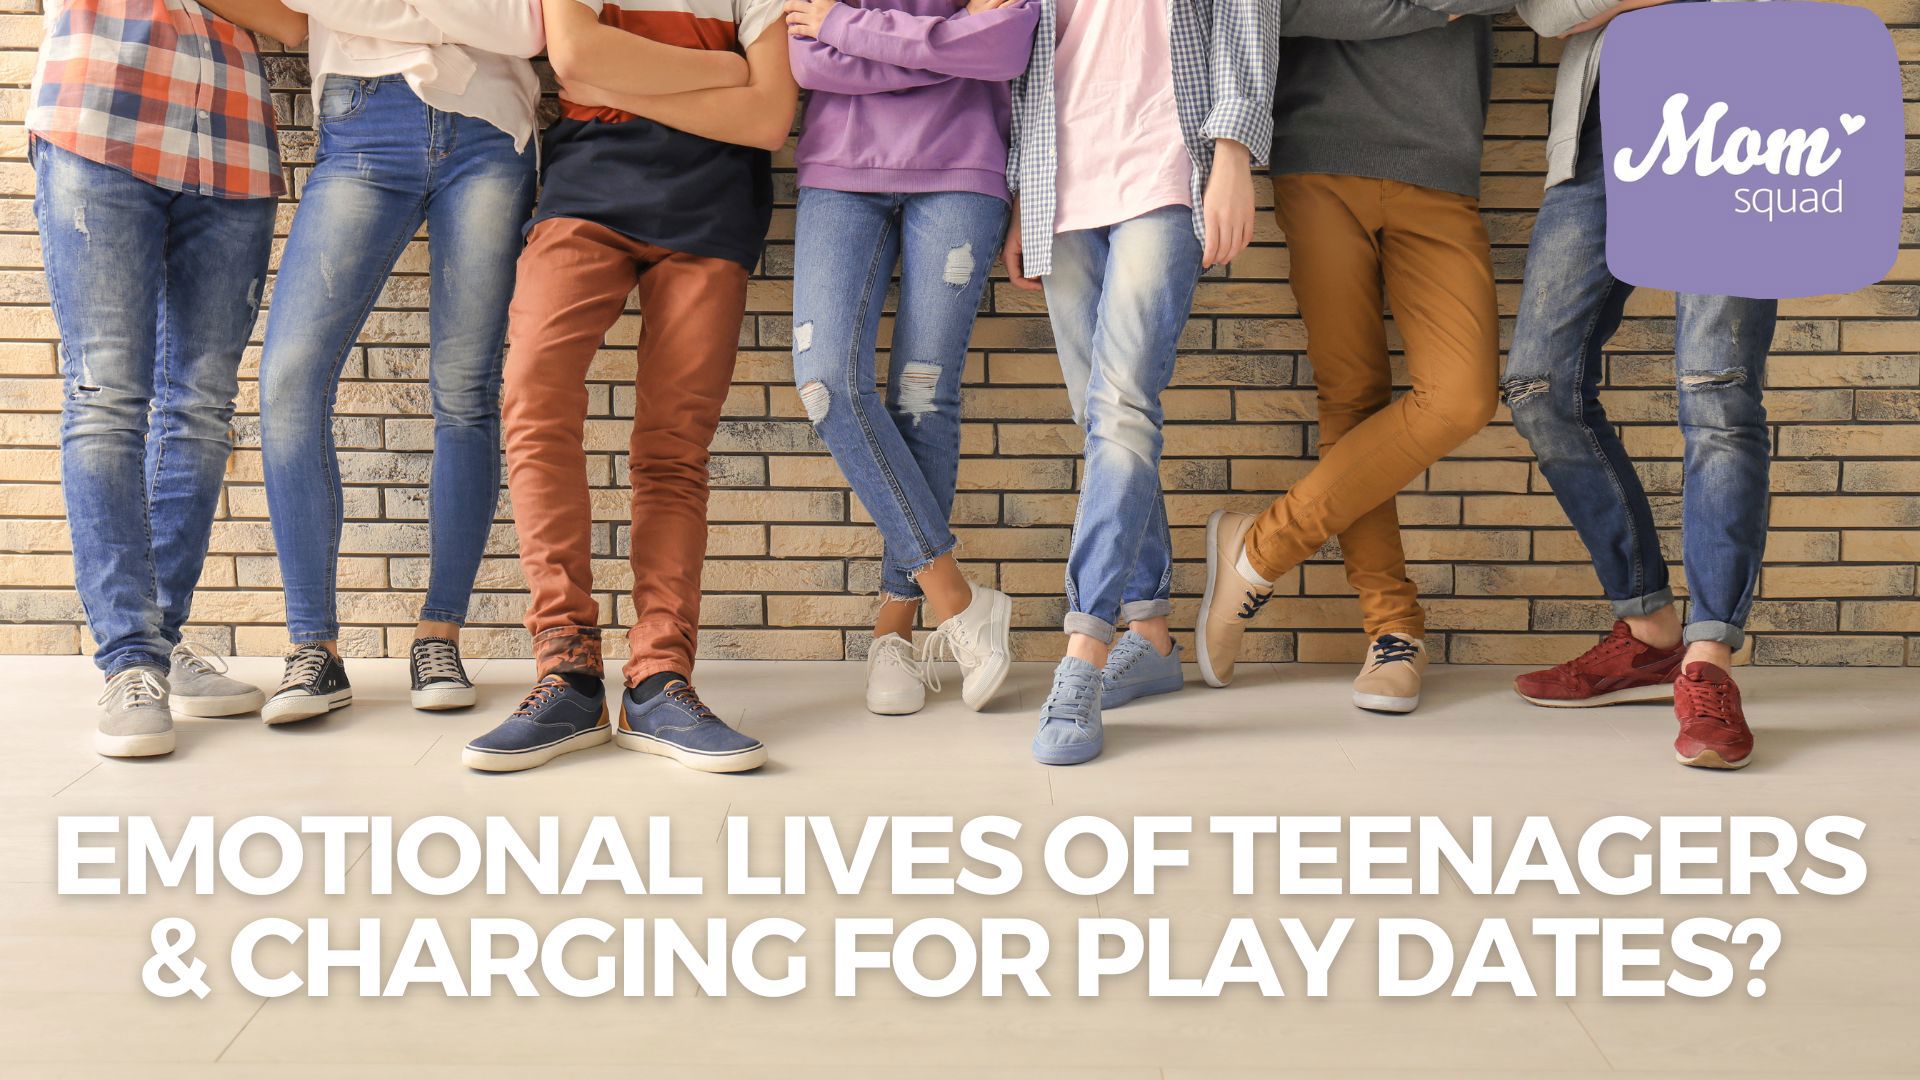 Maureen Kyle sits down with a psychologist specializing in teenagers. How to understand emotions and outside influences. Plus, should you charge for play dates?